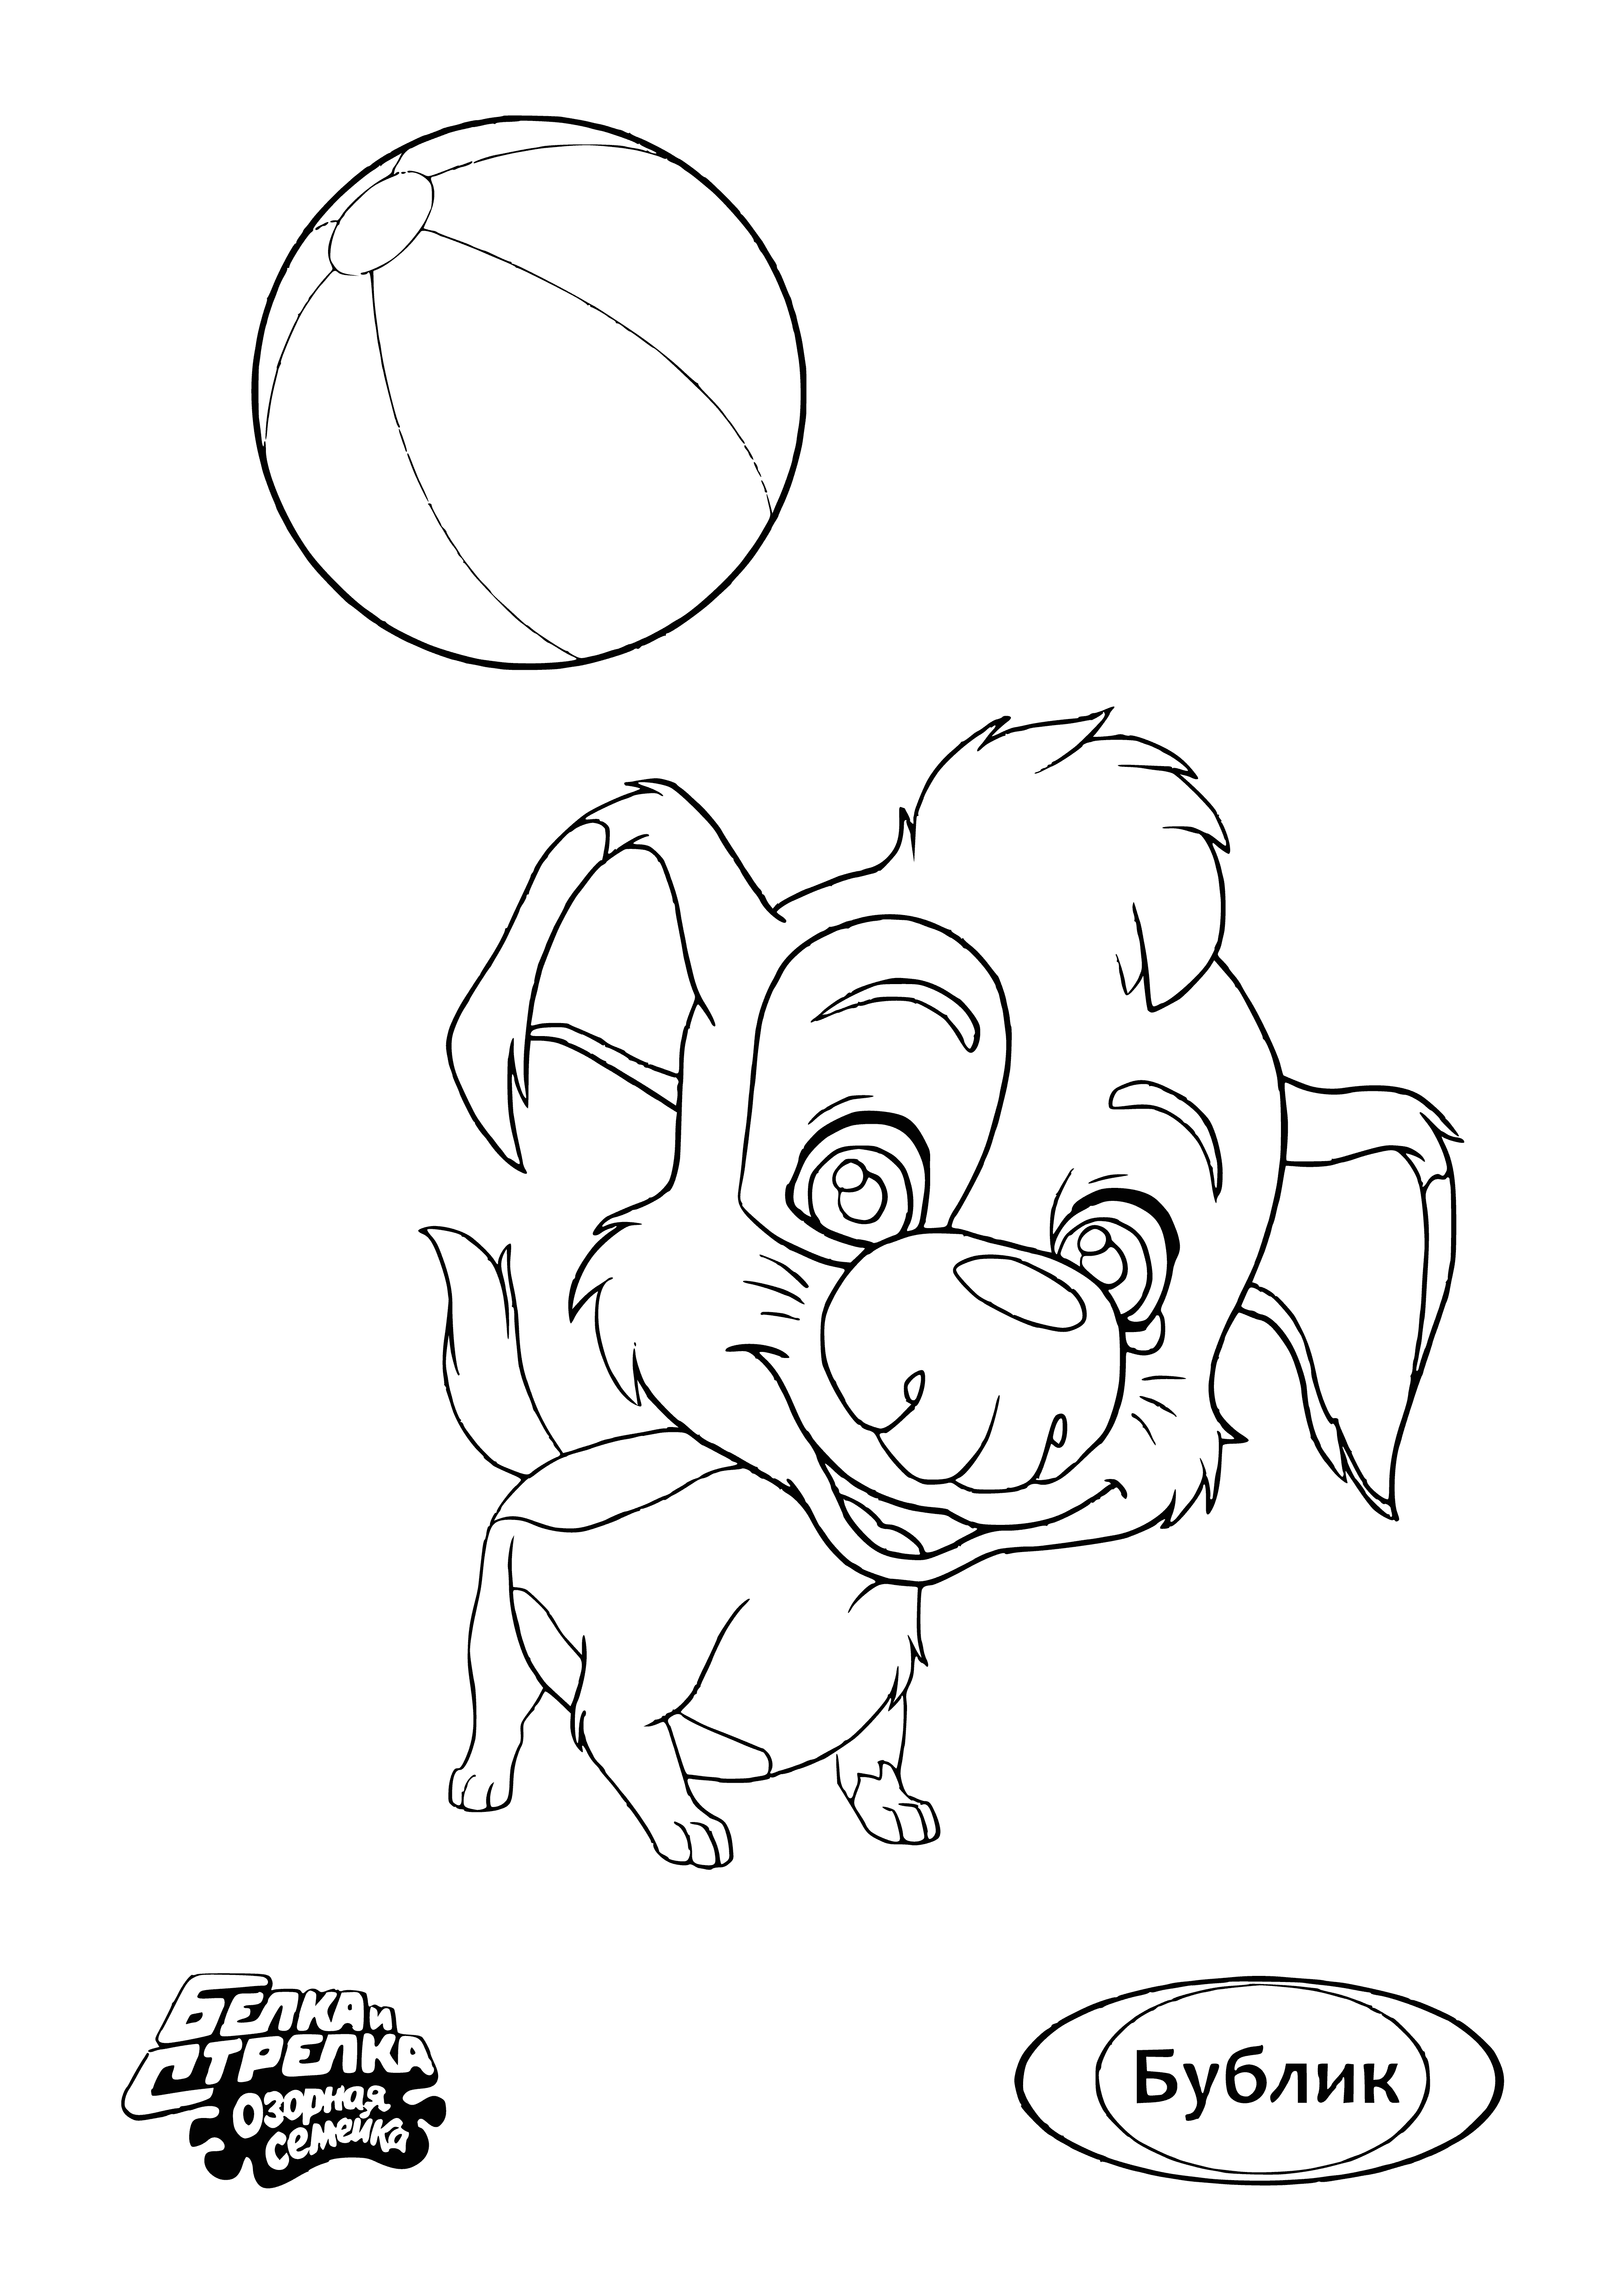 coloring page: Two smiling characters, bagel & ball, are looking at each other on this fun coloring page!